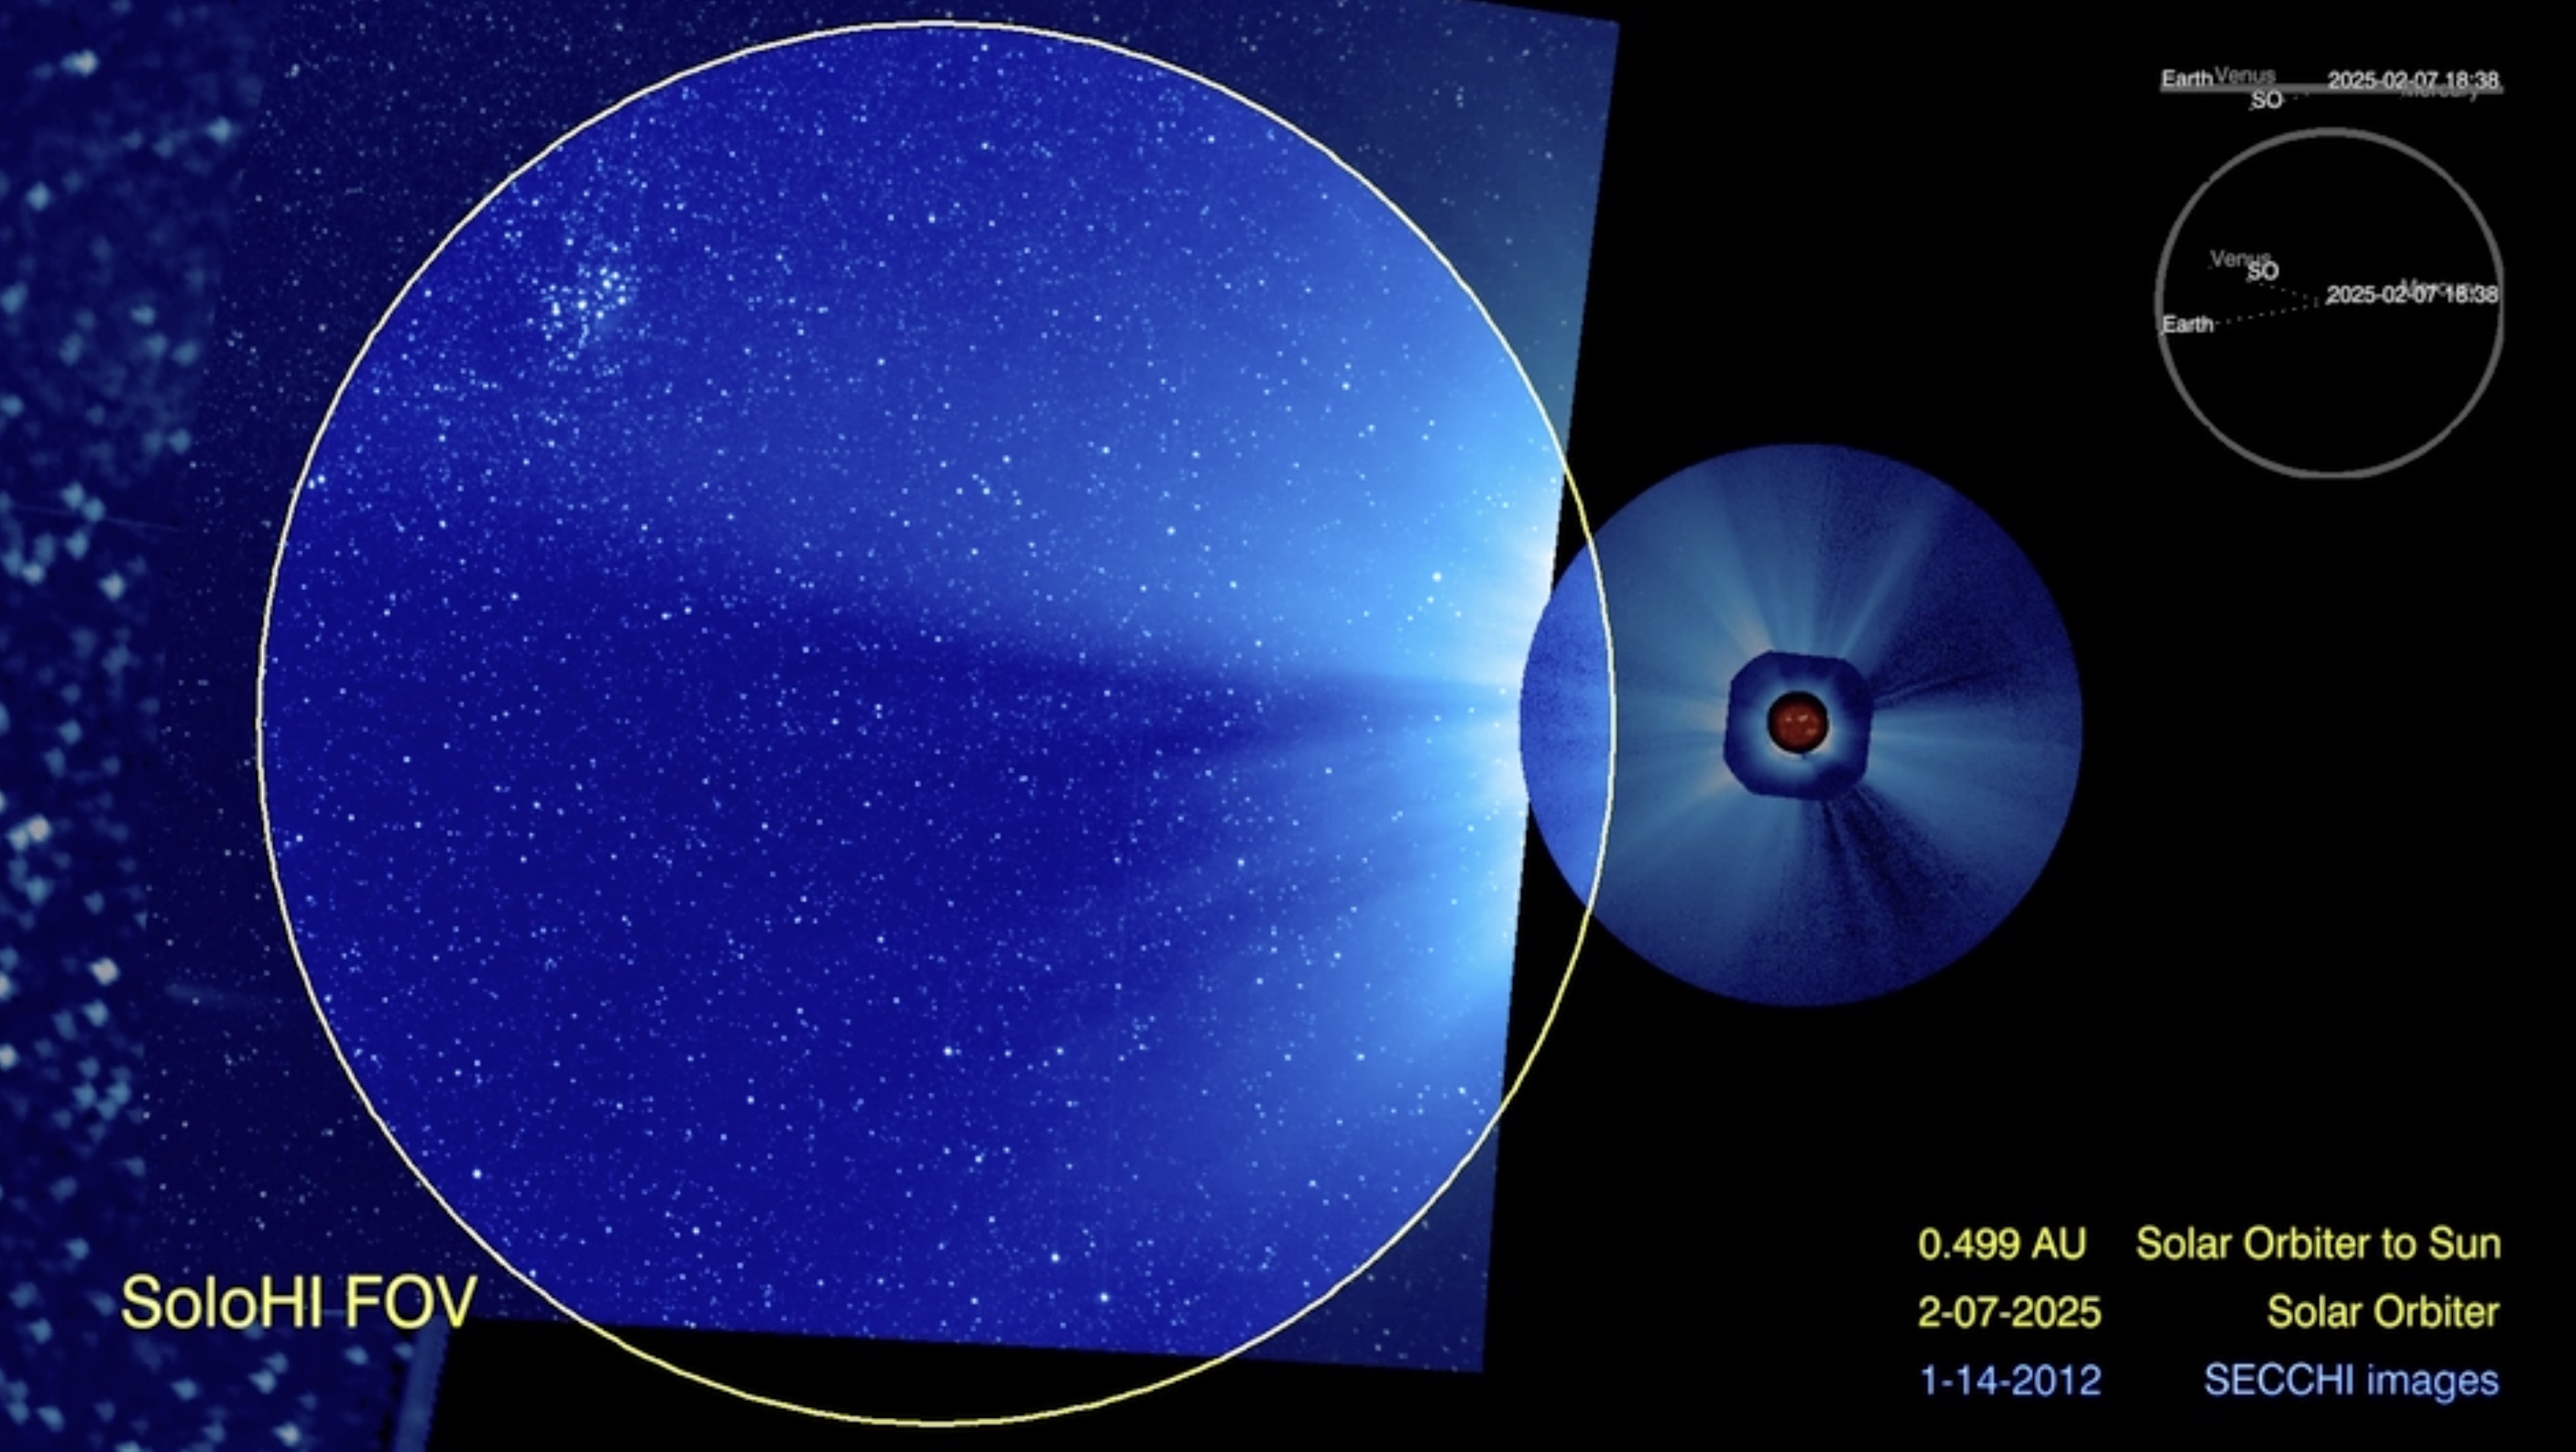 A simulation video of Solar Orbiter Heliospheric Imager’s (SoloHI) field of view (yellow circle) as it peers around Solar Orbiter’s heat shield. APL participated in the development of SoloHI.